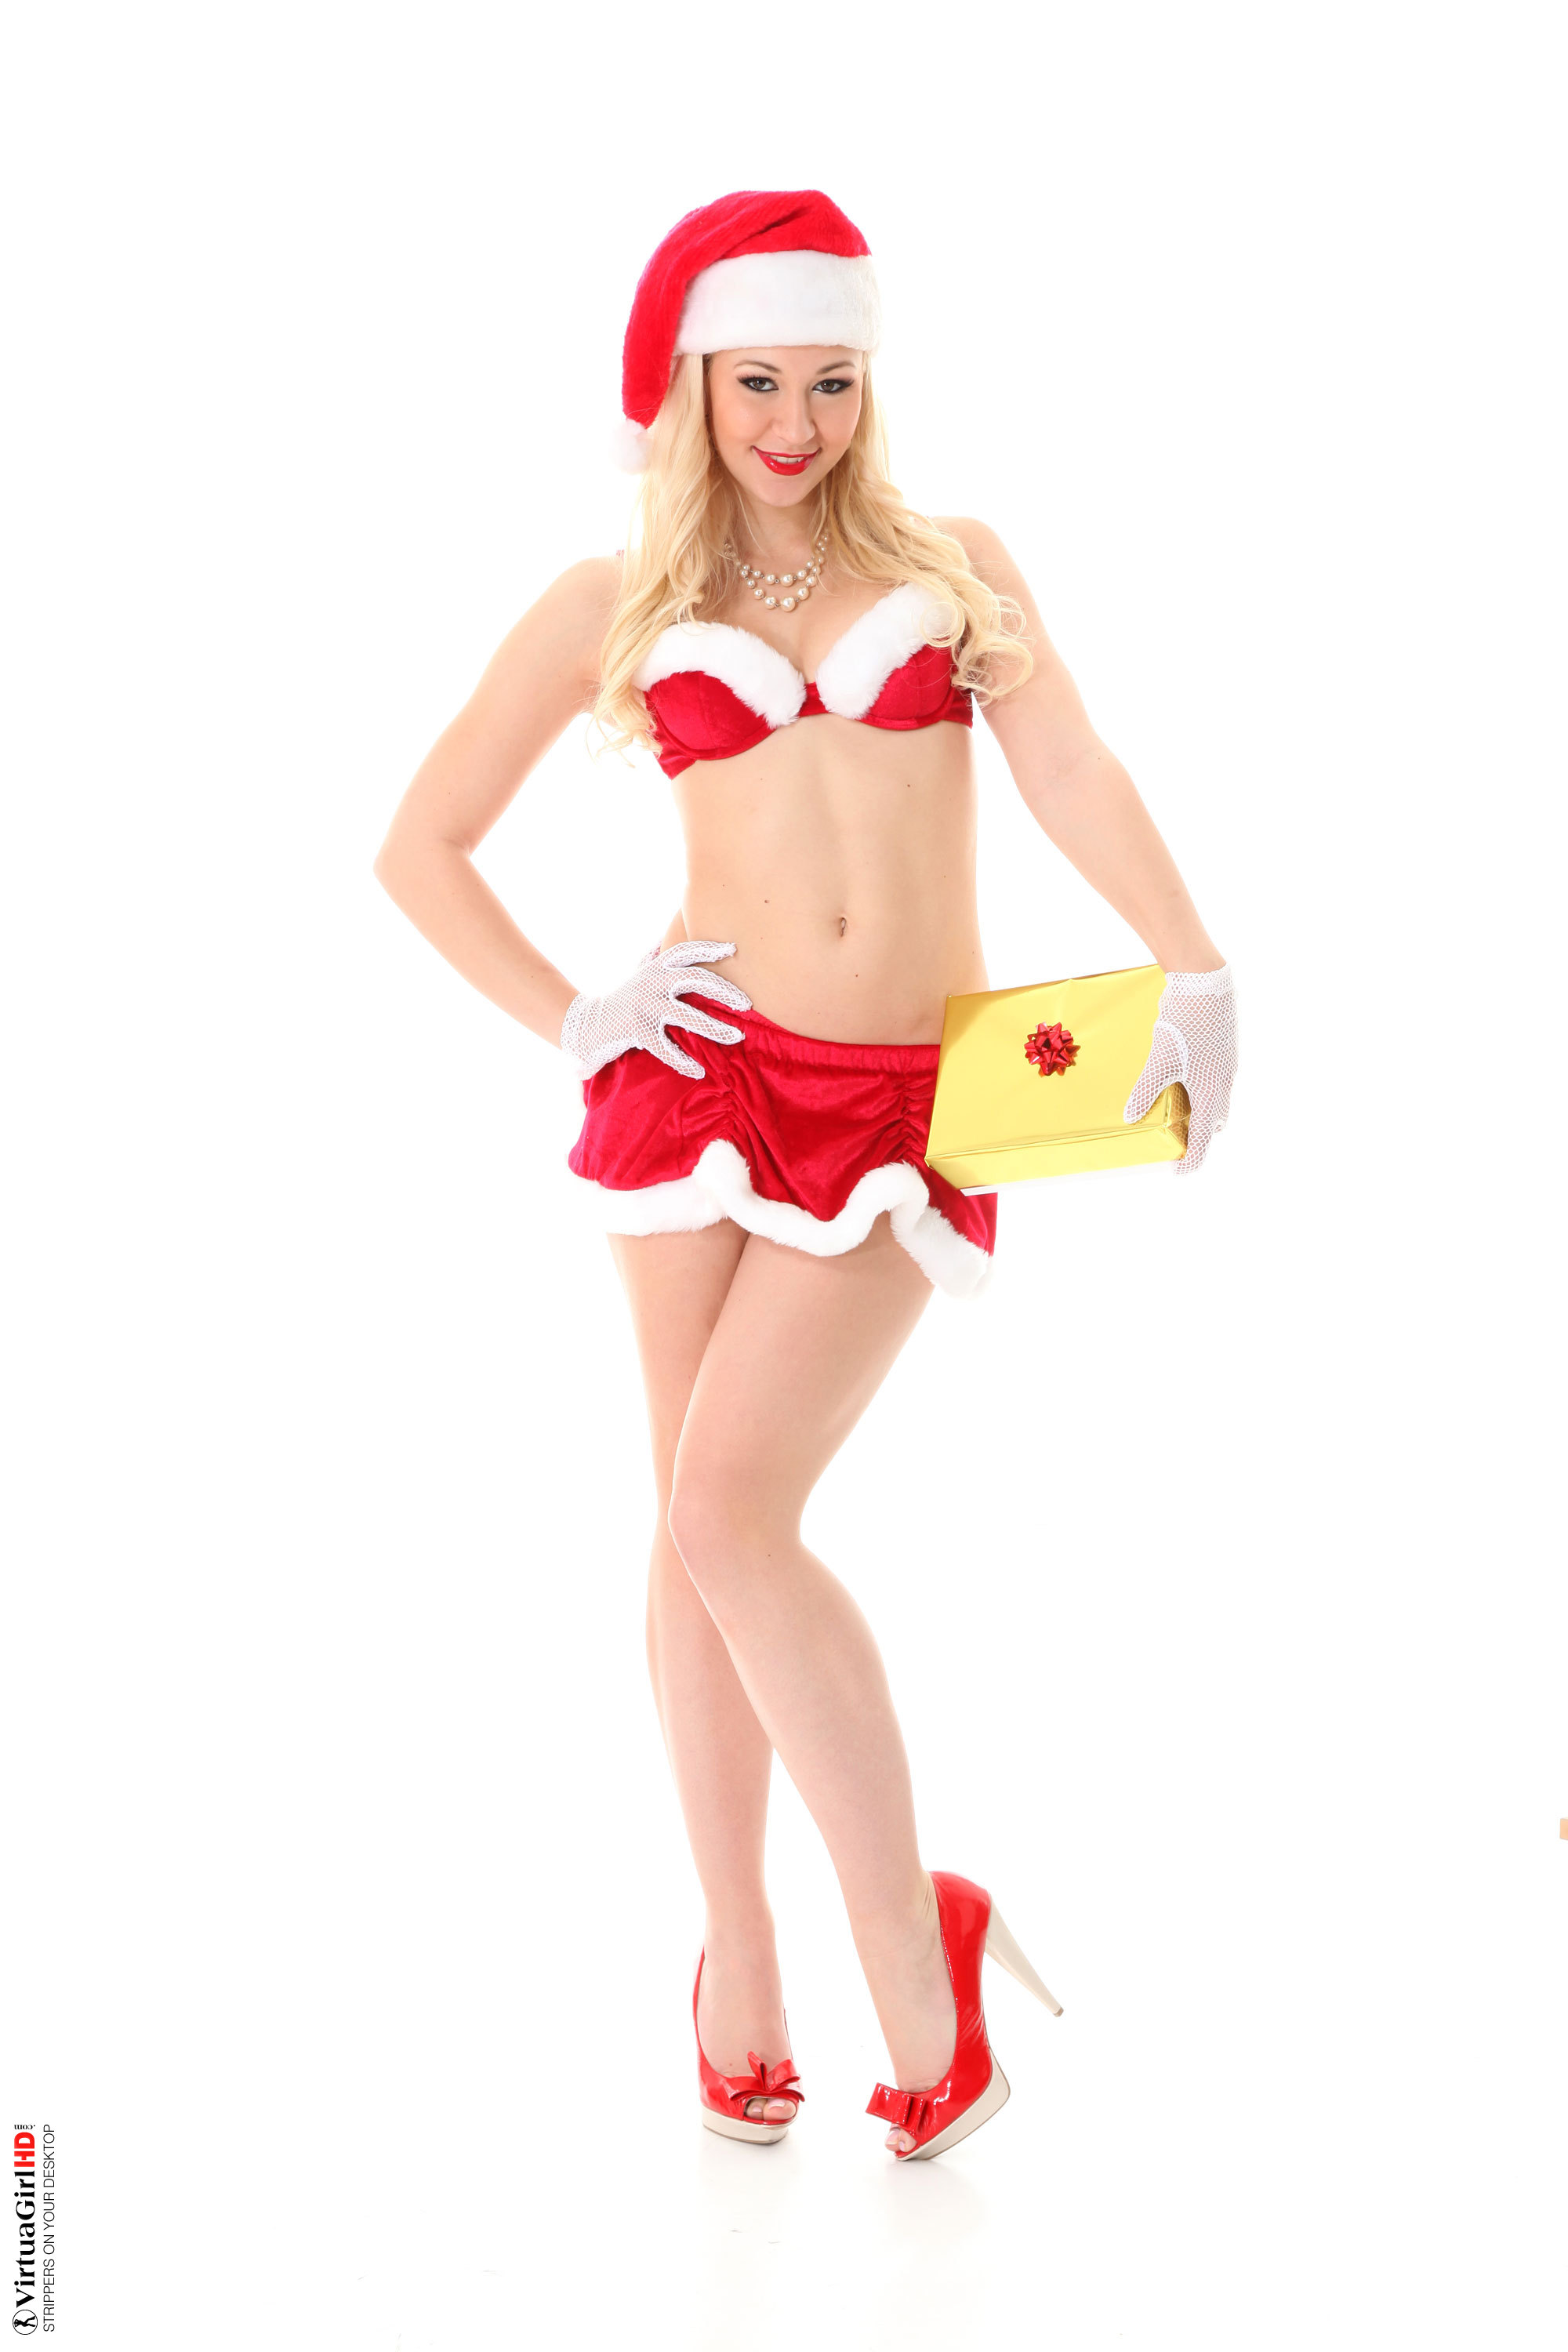 Tracy Lindsay Christmas gift istripper model